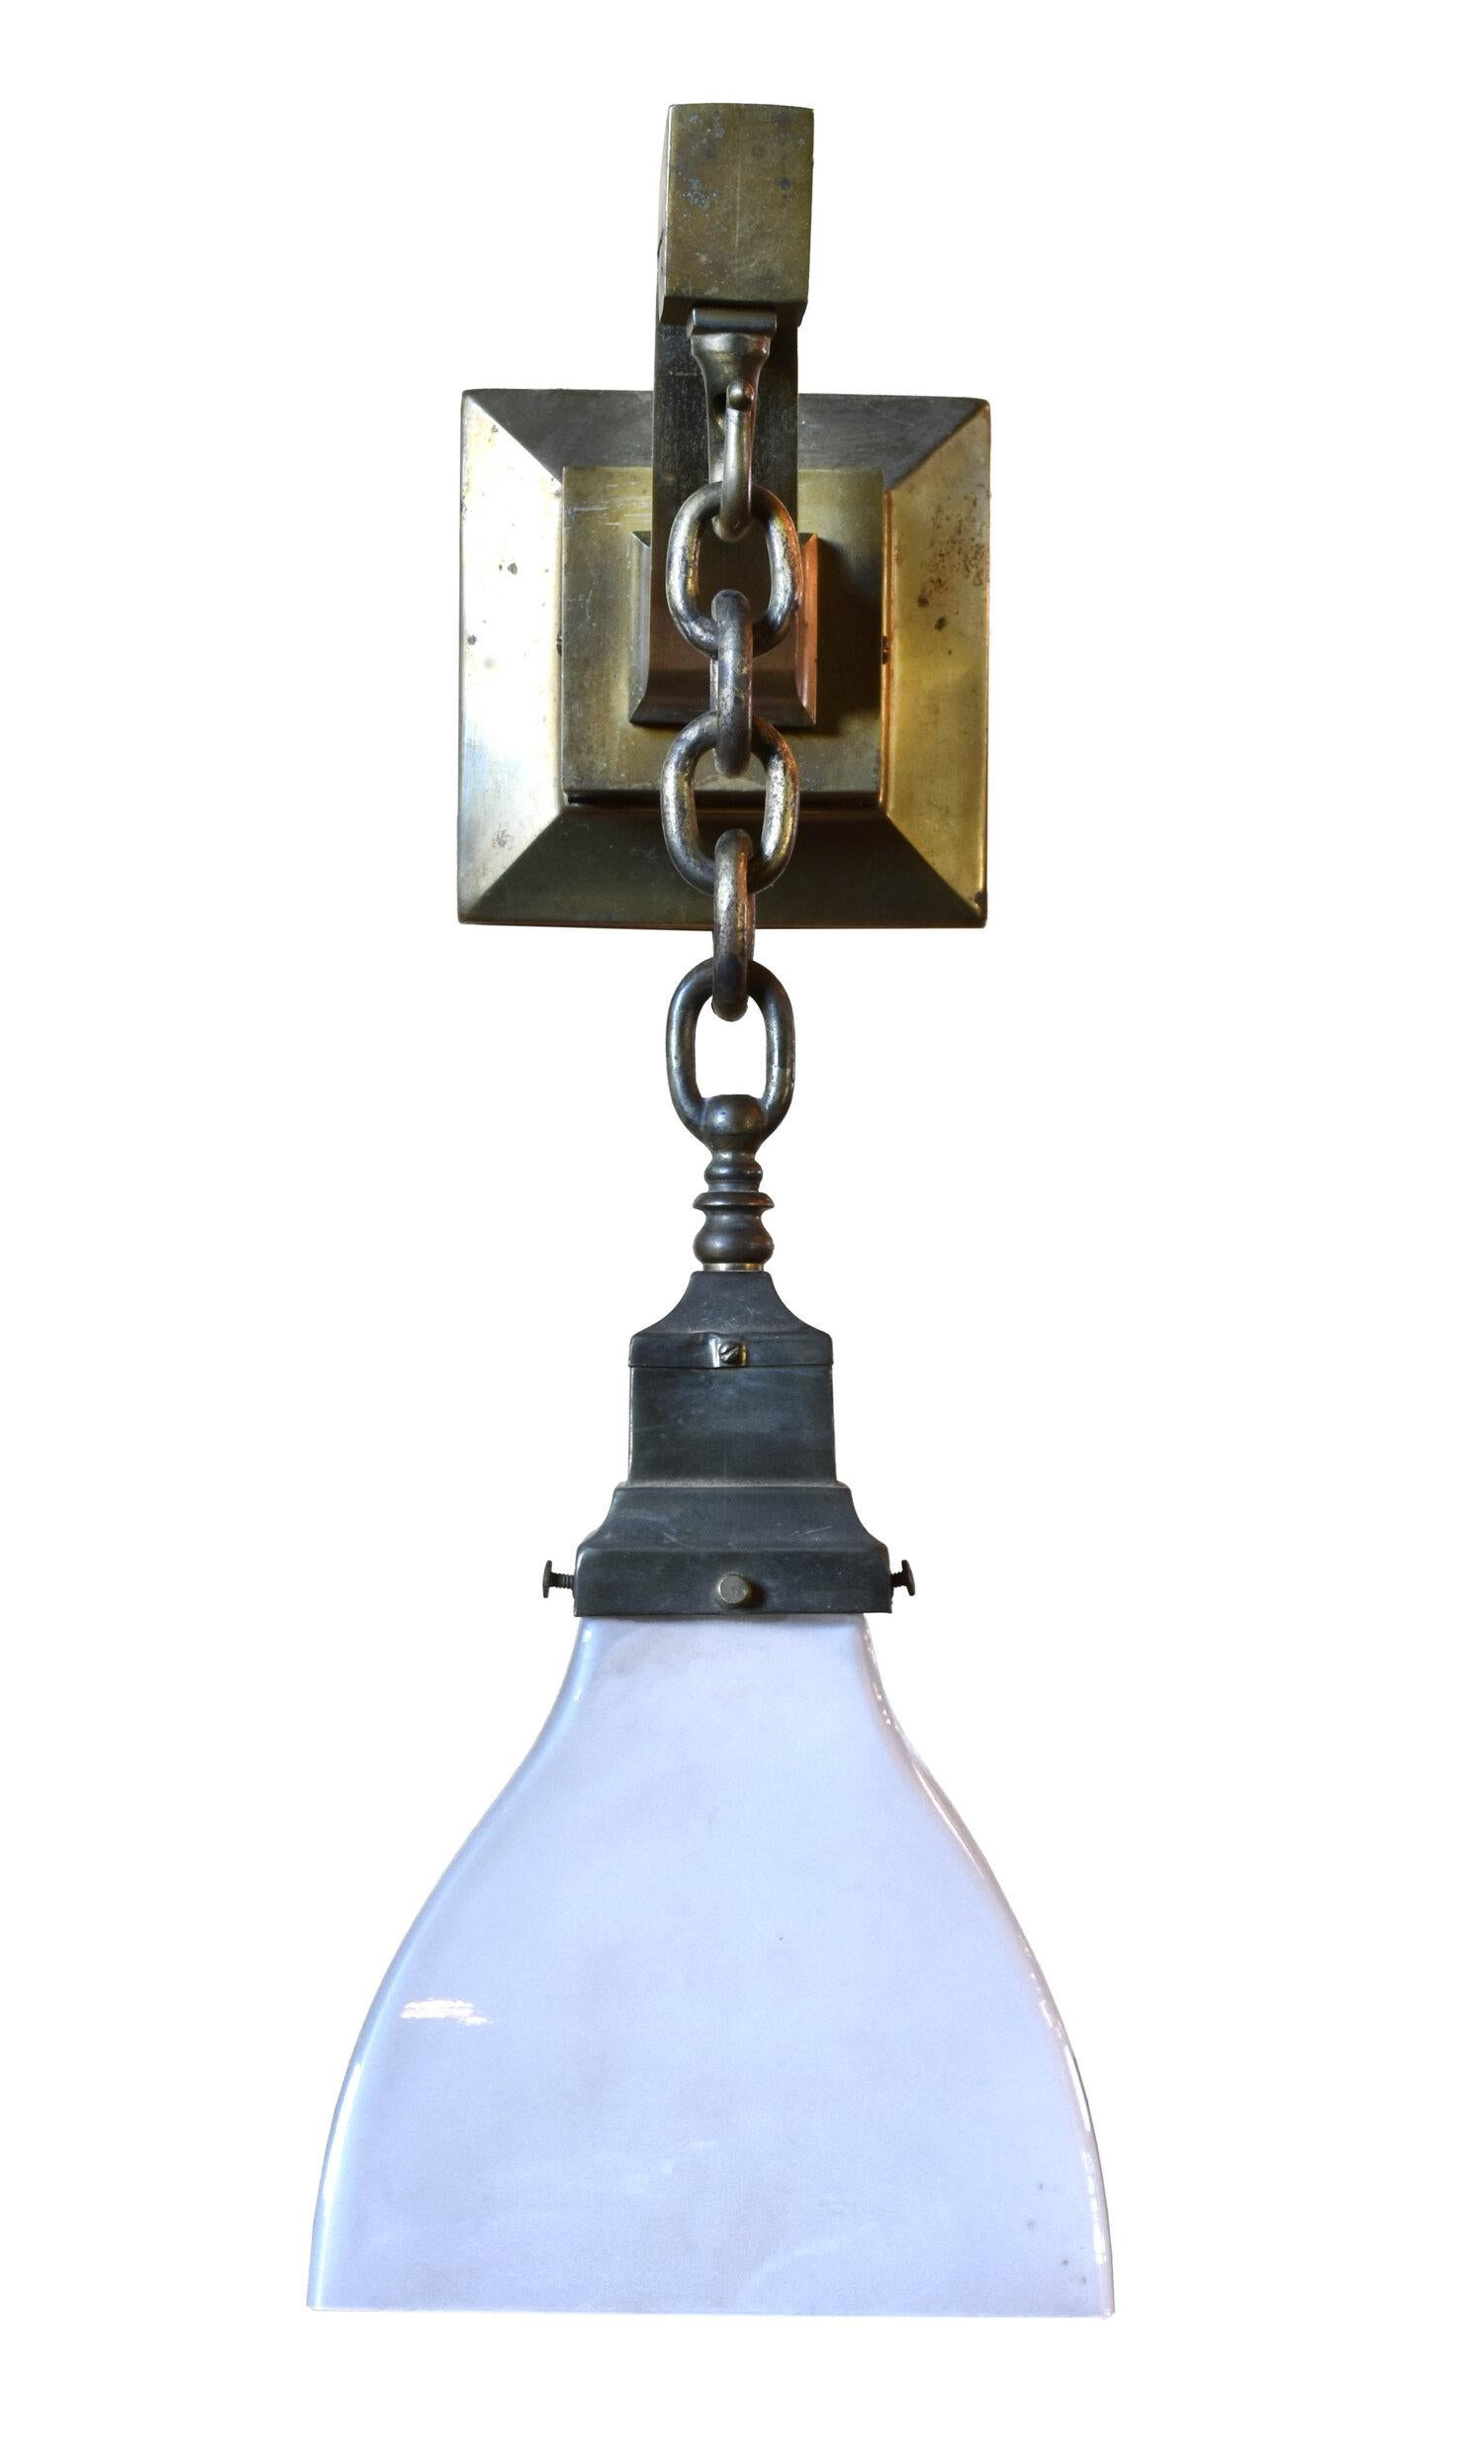 The curved Greek Key arm gives a Neoclassical style to this Mission-style sconce. A large square shade grounds this large light fixture. Perfect simple sconce over a small entry side table. 

Illumination: 1 standard Edison socket 
Measures: 5